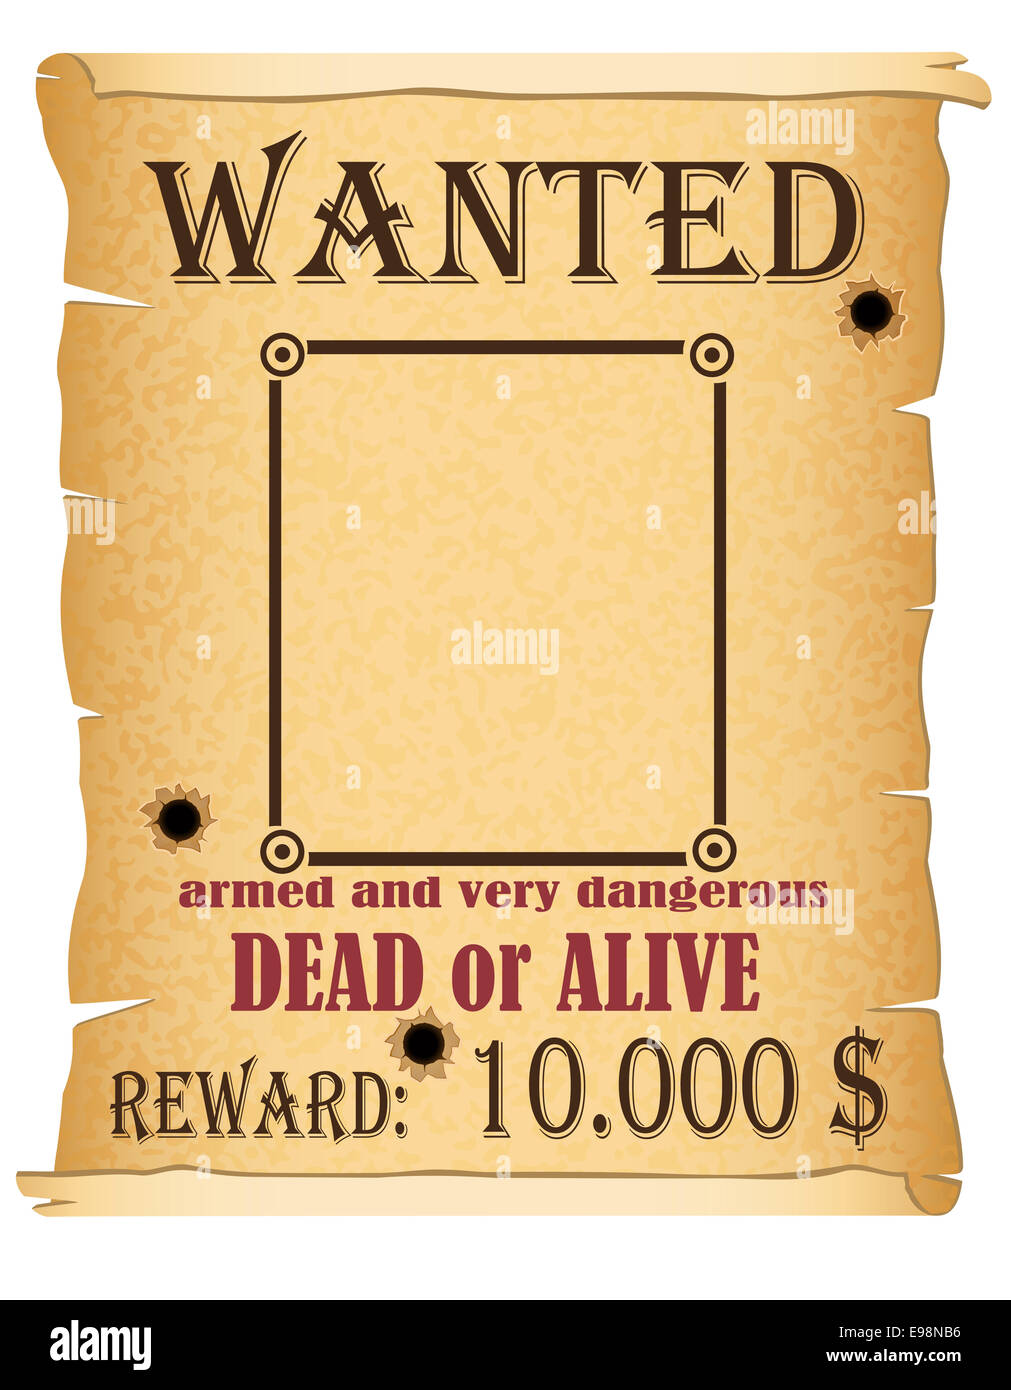 announcement wanted criminal poster illustration isolated on white background Stock Photo